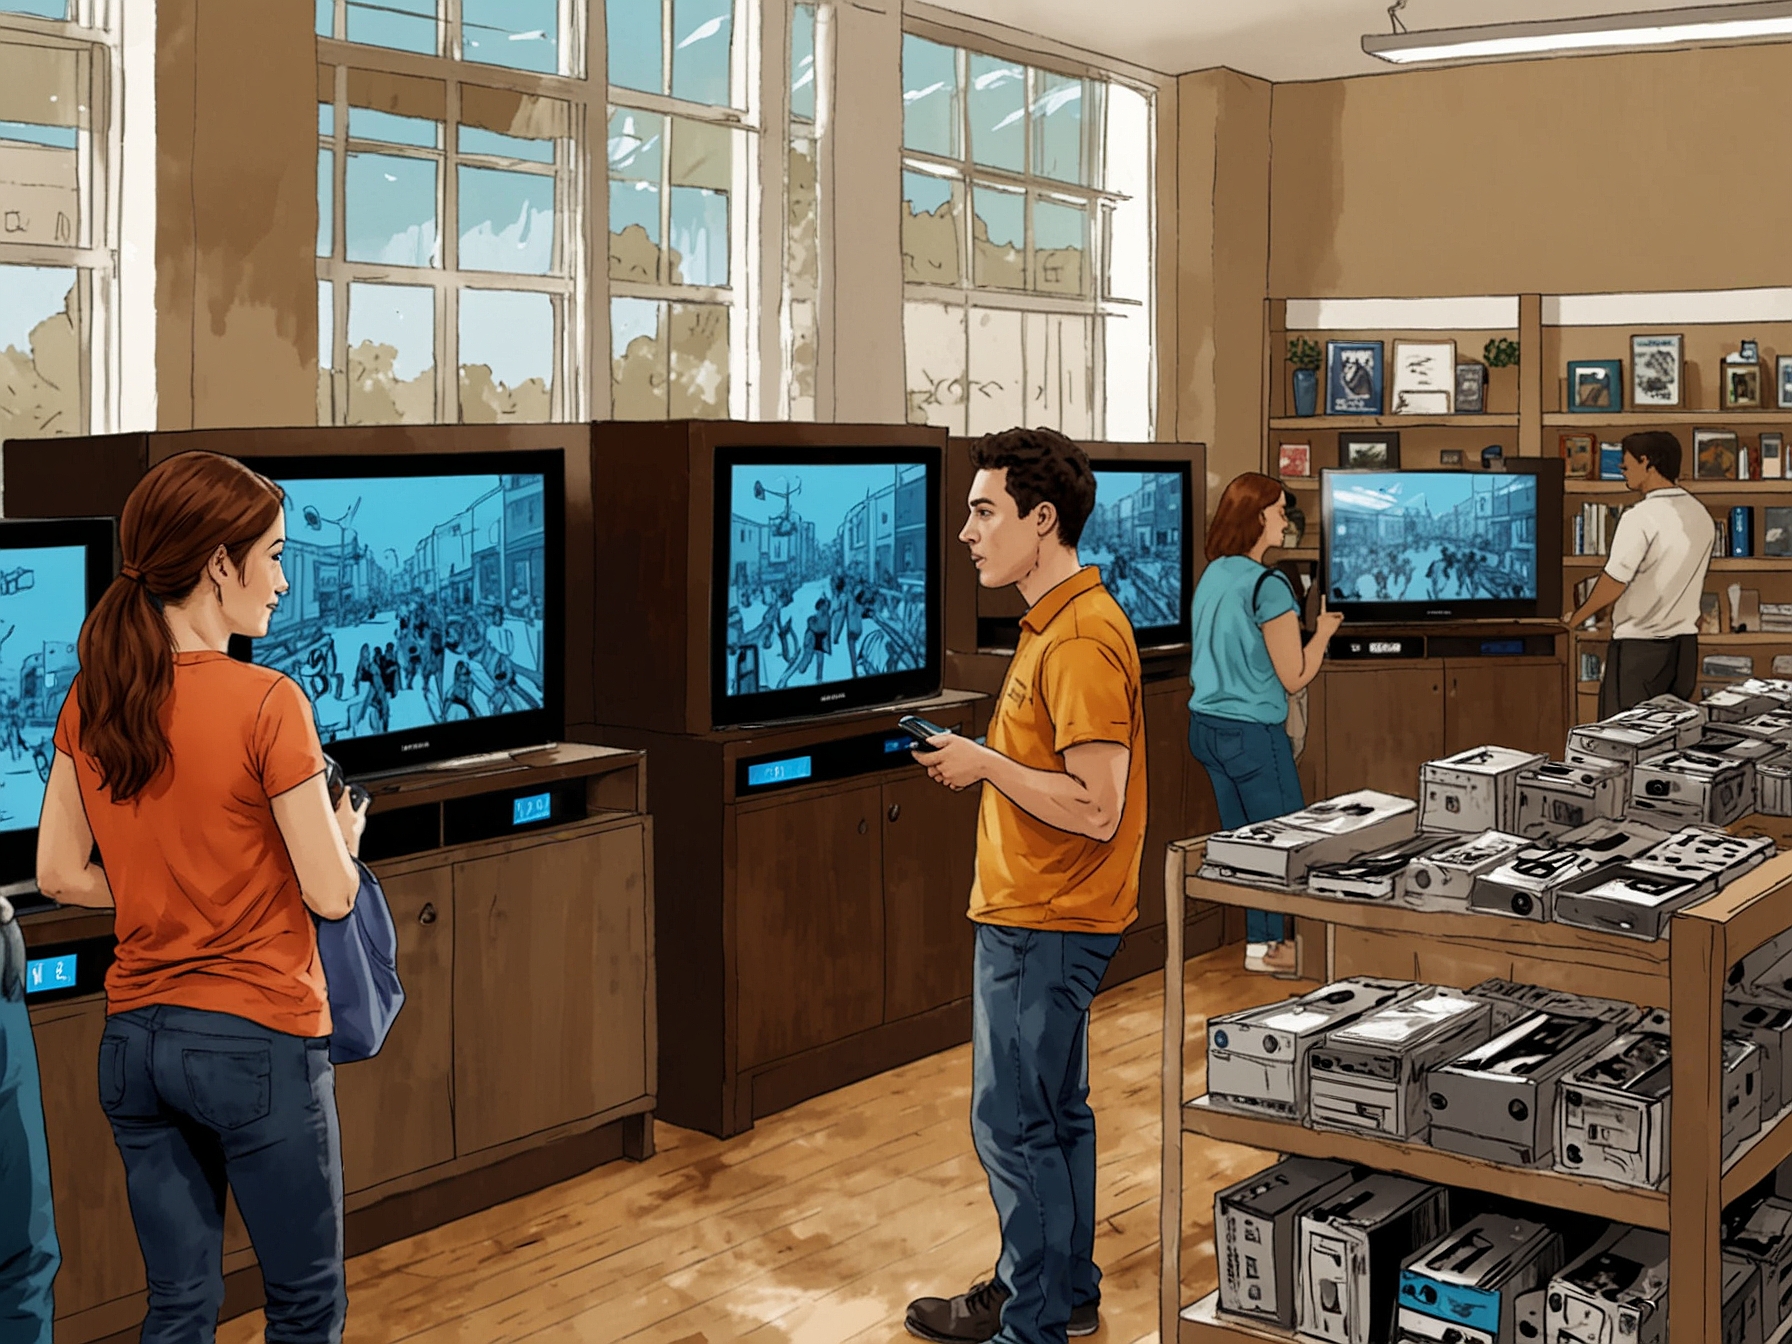 Shoppers exploring various discounted Samsung TV models at an electronics store, eager to take advantage of up to $2,400 in savings on top-quality home entertainment systems.